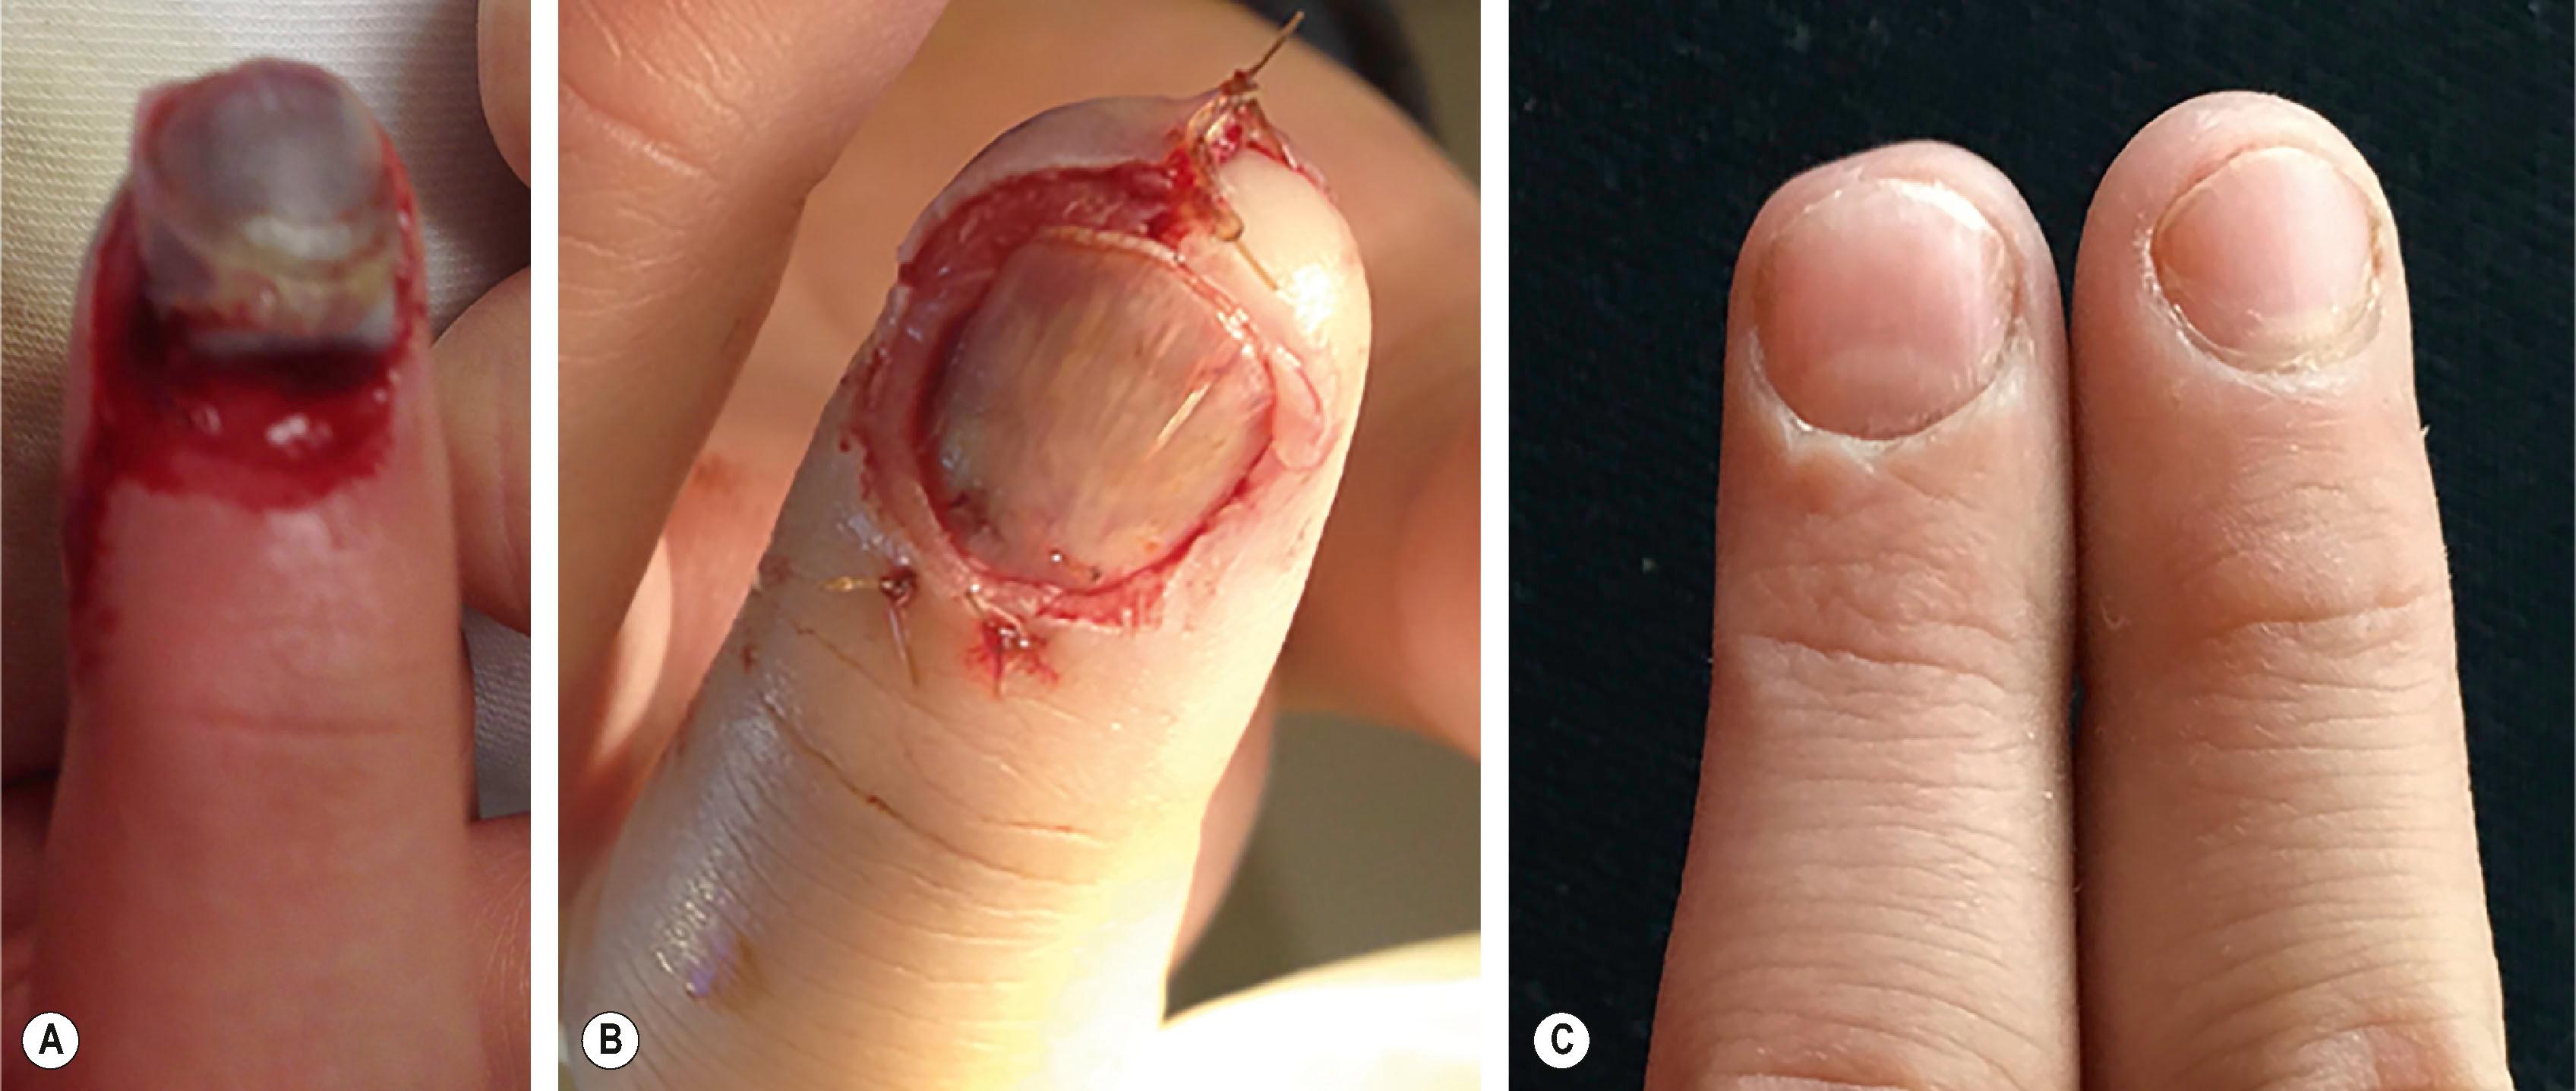 Figure 6.5, An 11-year-old male crushed his left index finger in a fence and suffered (A) an avulsion injury of the nail plate with a stellate laceration of the nail bed in the sterile matrix with an intact germinal matrix. (B) The nail was taken off with a Freer elevator, the nail bed and hyponychium were repaired, and the nail plate replaced. (C) 4 months after injury and repair (left index finger) compared to the uninjured right index fingernail.